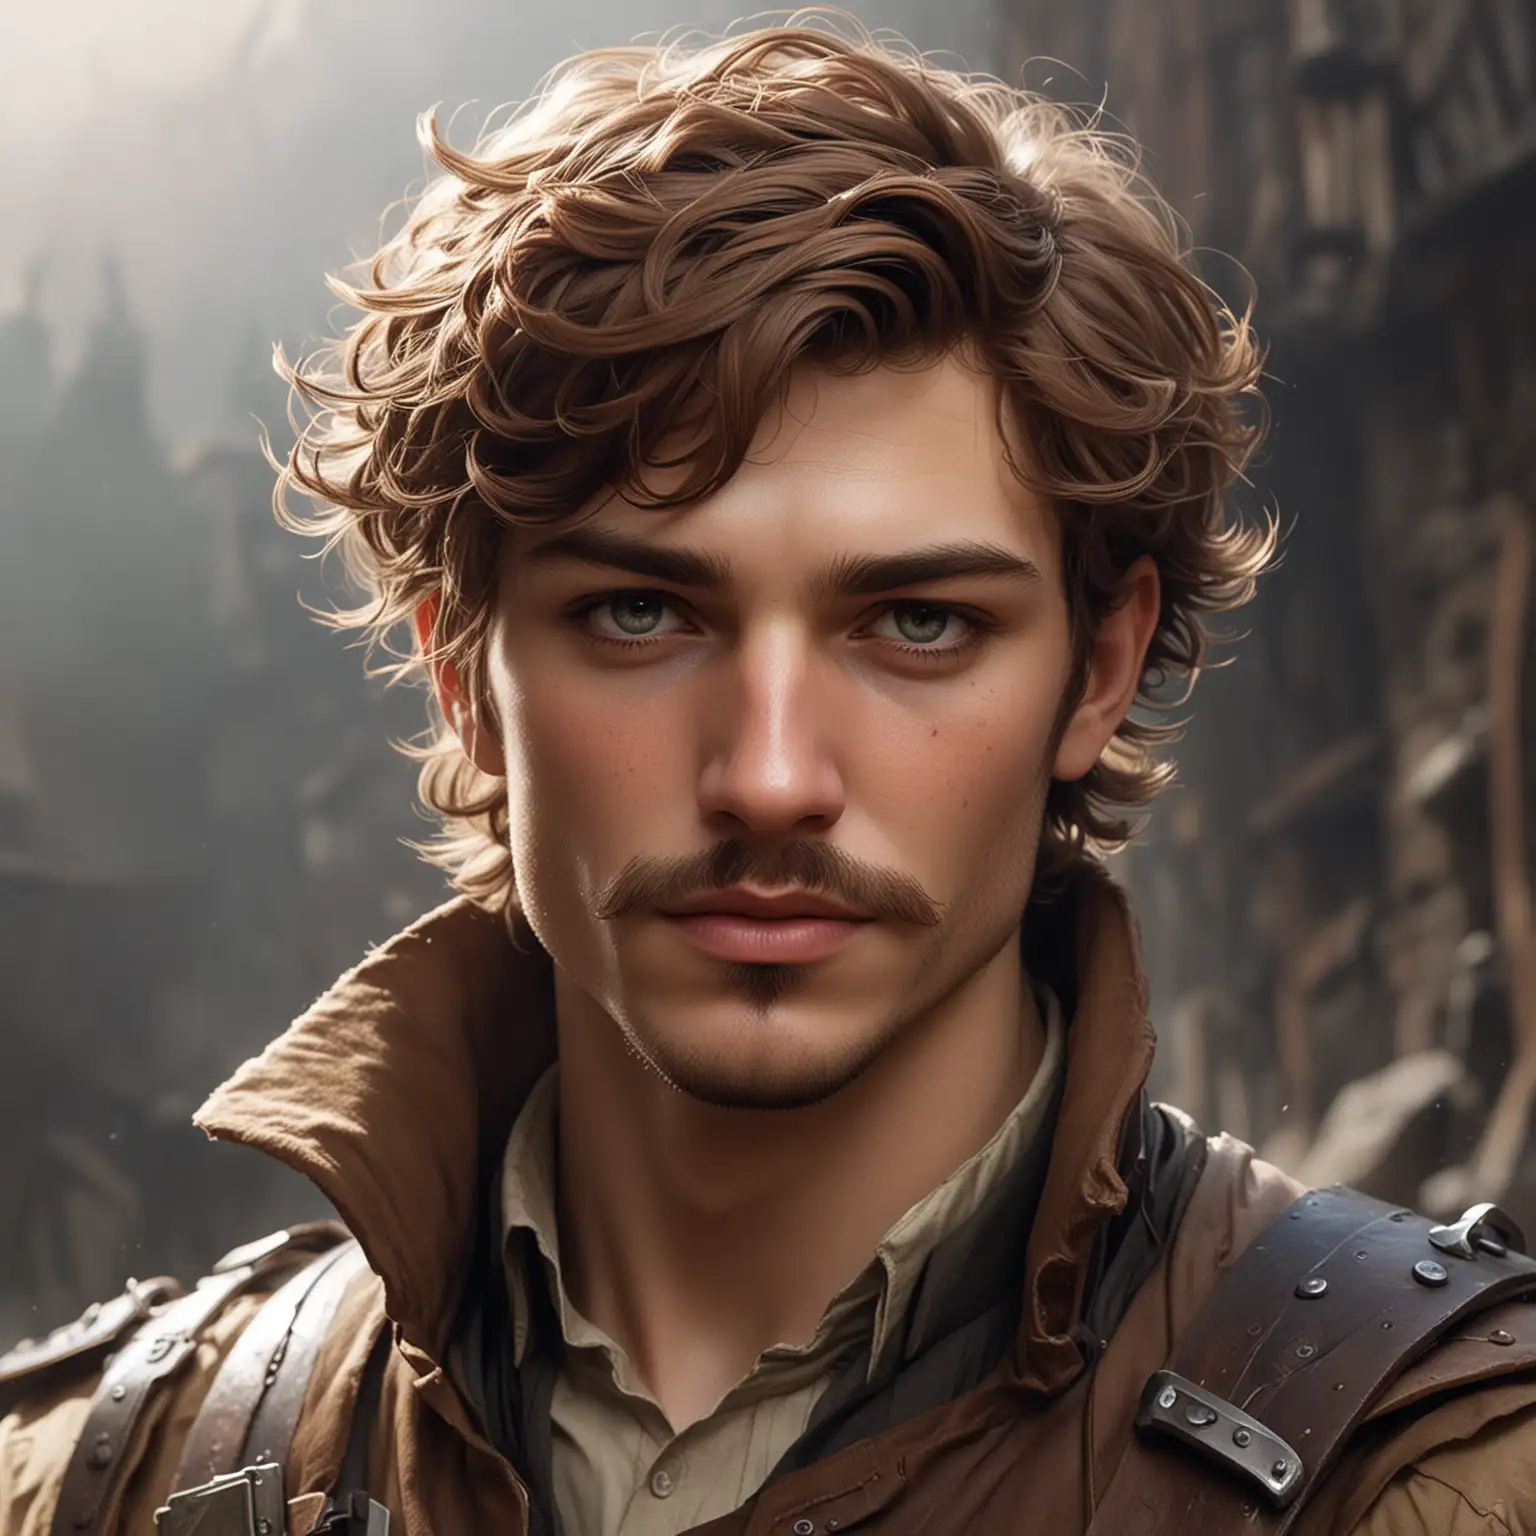 Fantasy rogue, ruggedly handsome pale skin, short cut brown hair, curled mustache, artwork